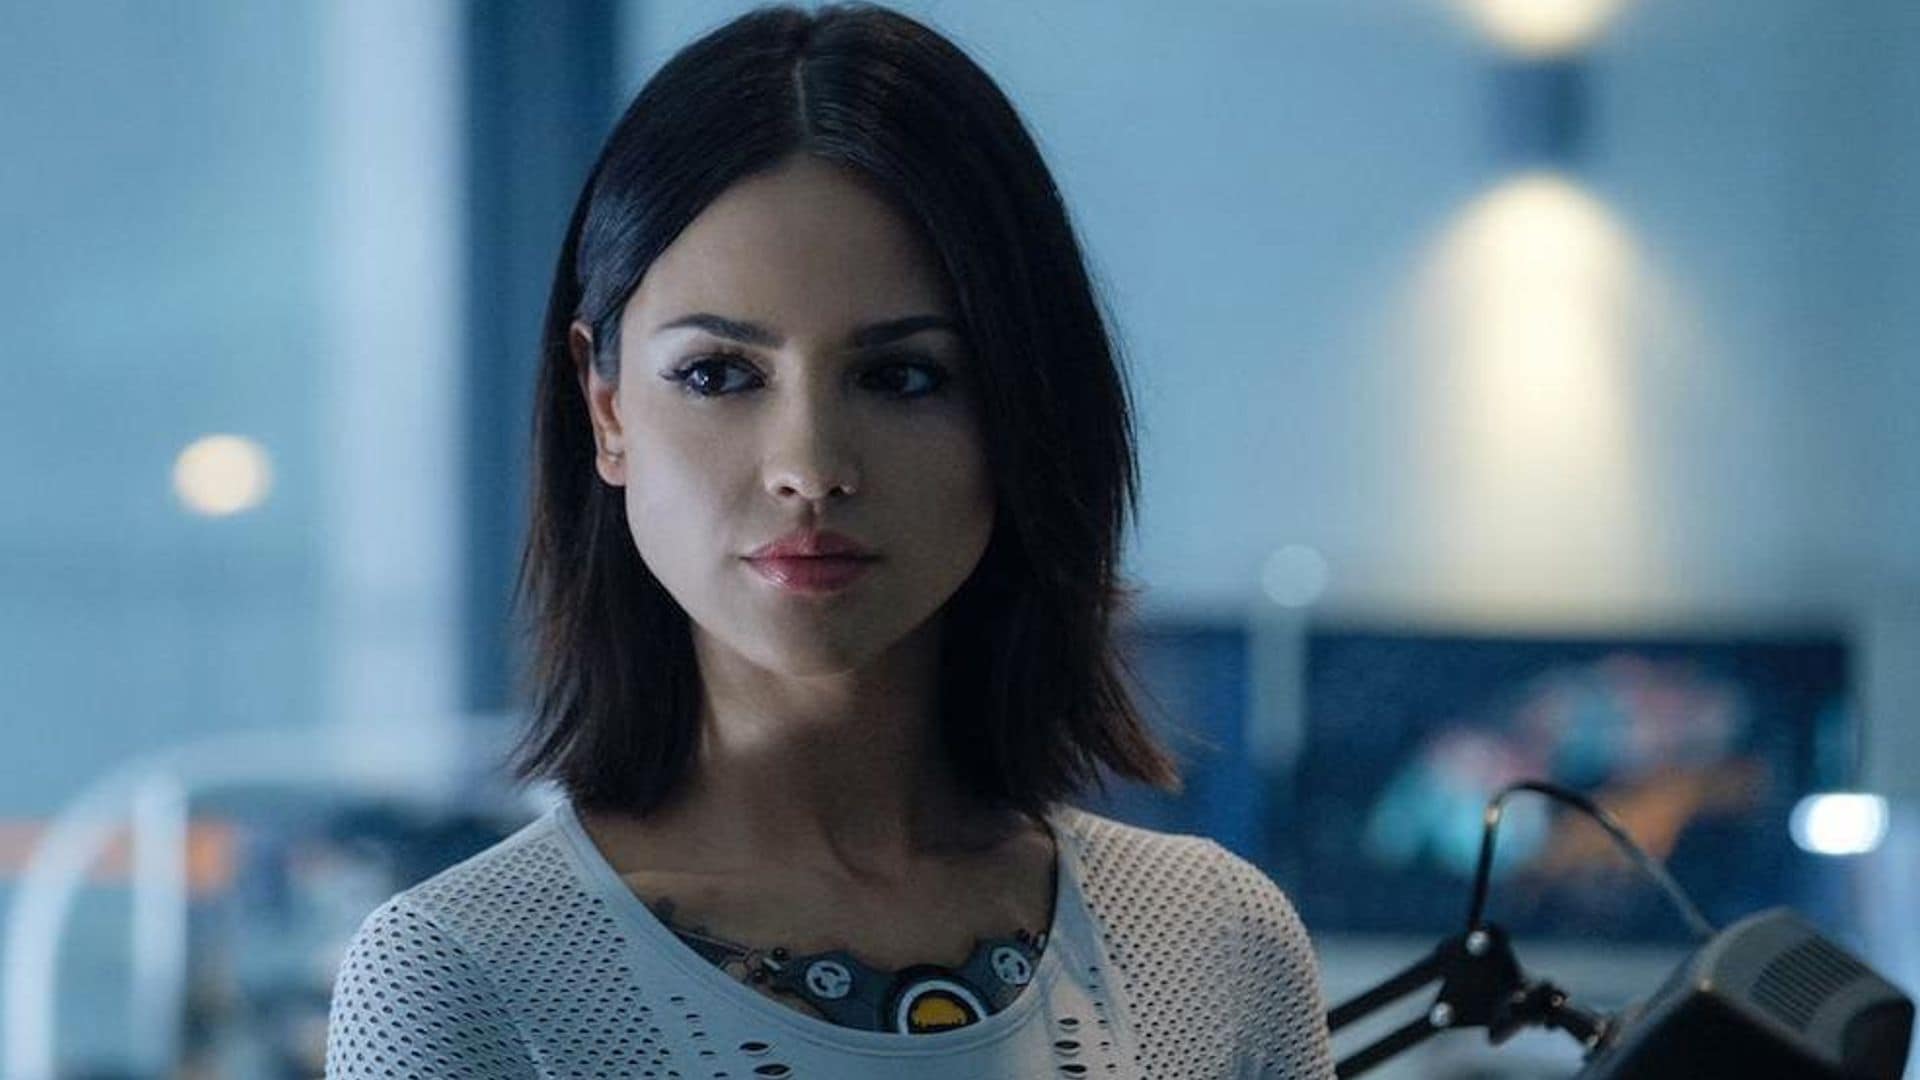 Eiza González tells us her superpower and explains why she too feels like an outsider